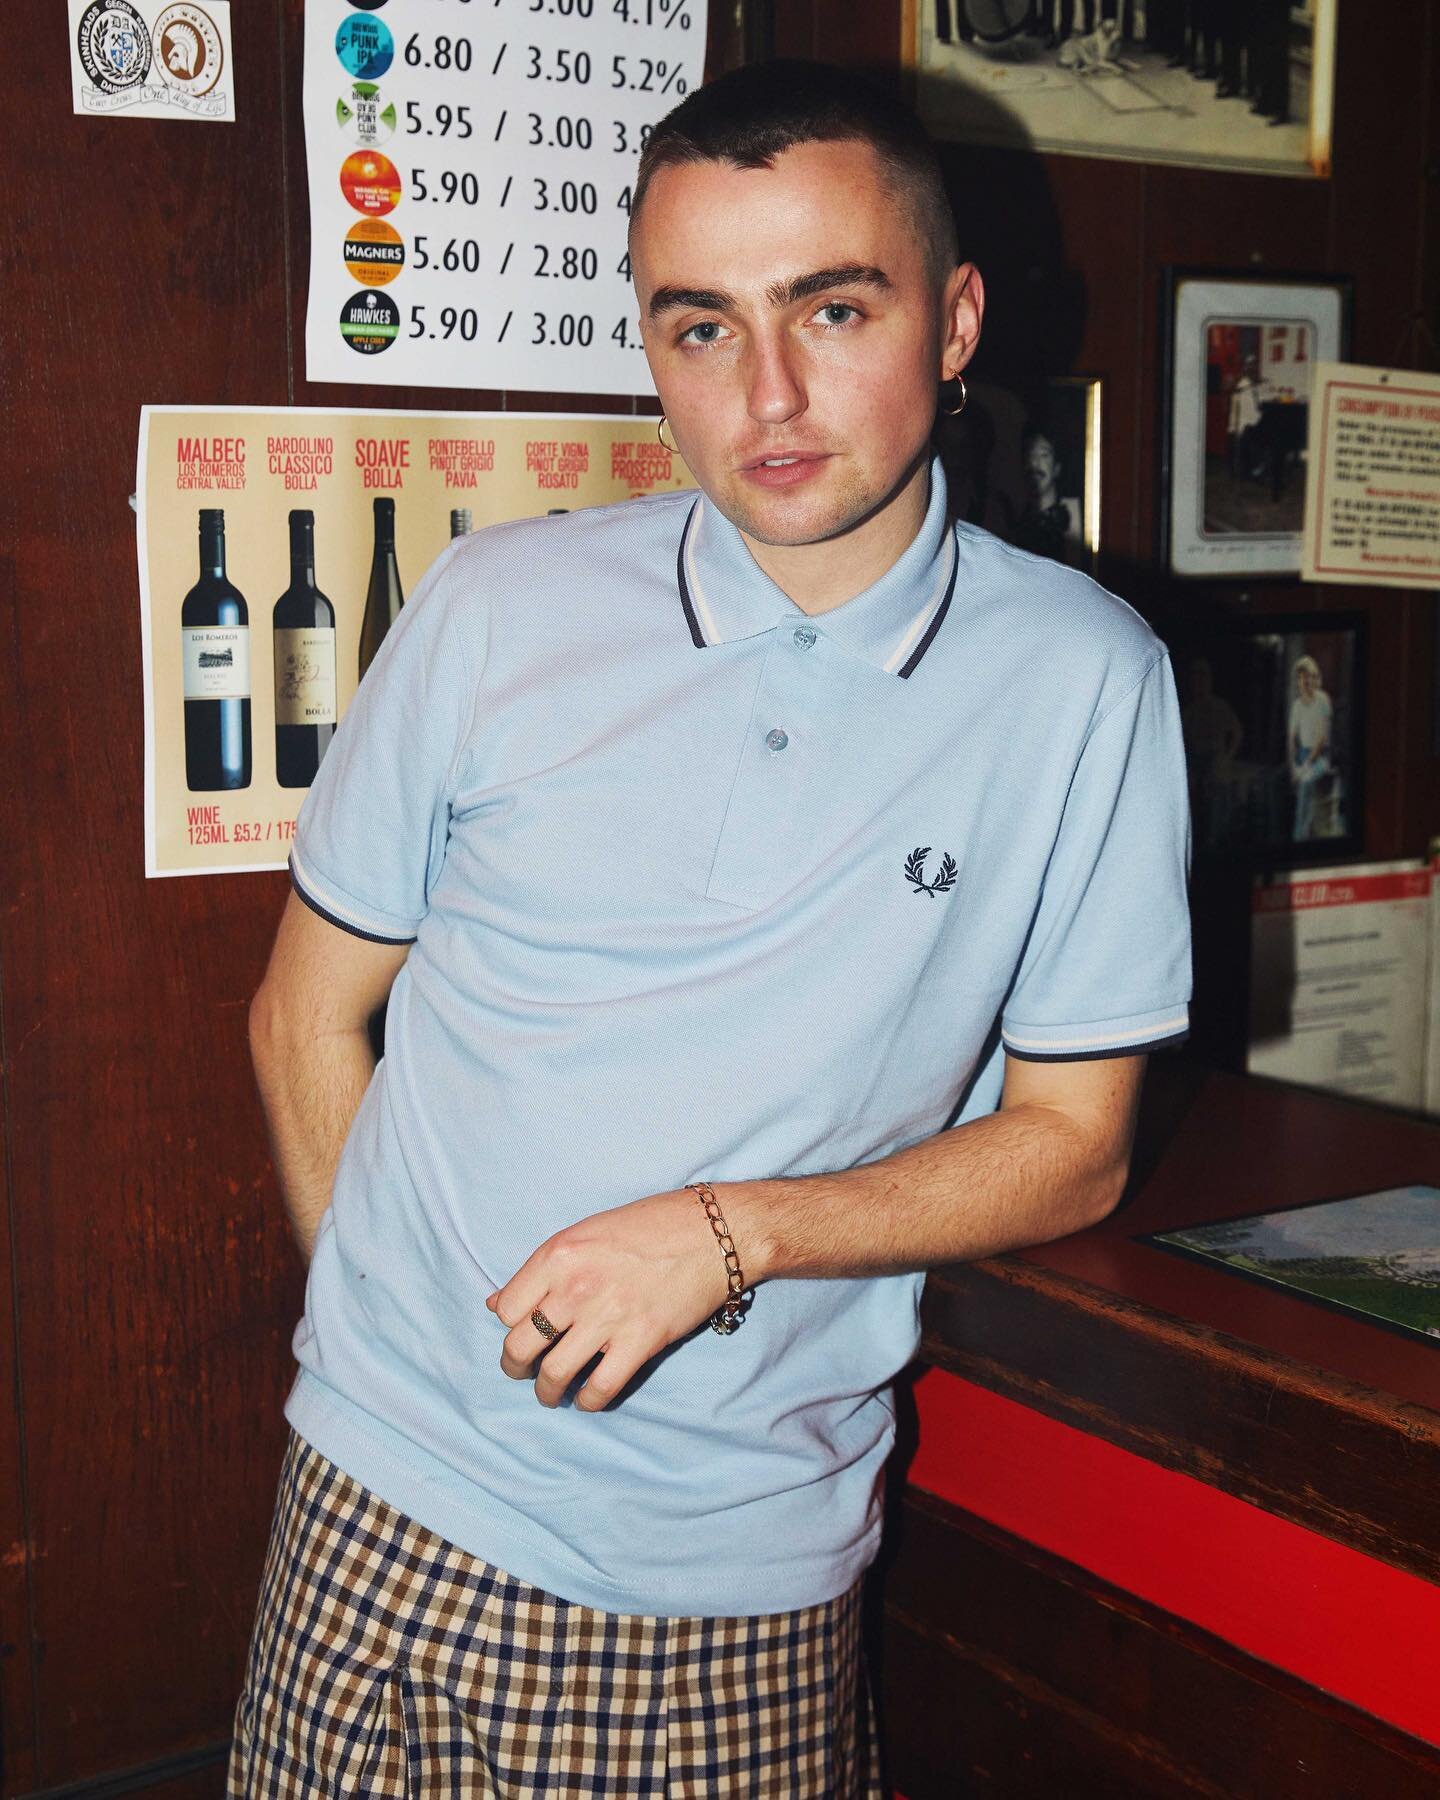 All the cool kids shot at @100clublondon for @fredperry on 35mm film and digital 

Live music from @lastwholeearthcatalog @the_new_eves @mrskydaddy @uglyofficialuk 

💋 @ali_quinlandave 

#rebeccazephyrthomas #fredperry #100club